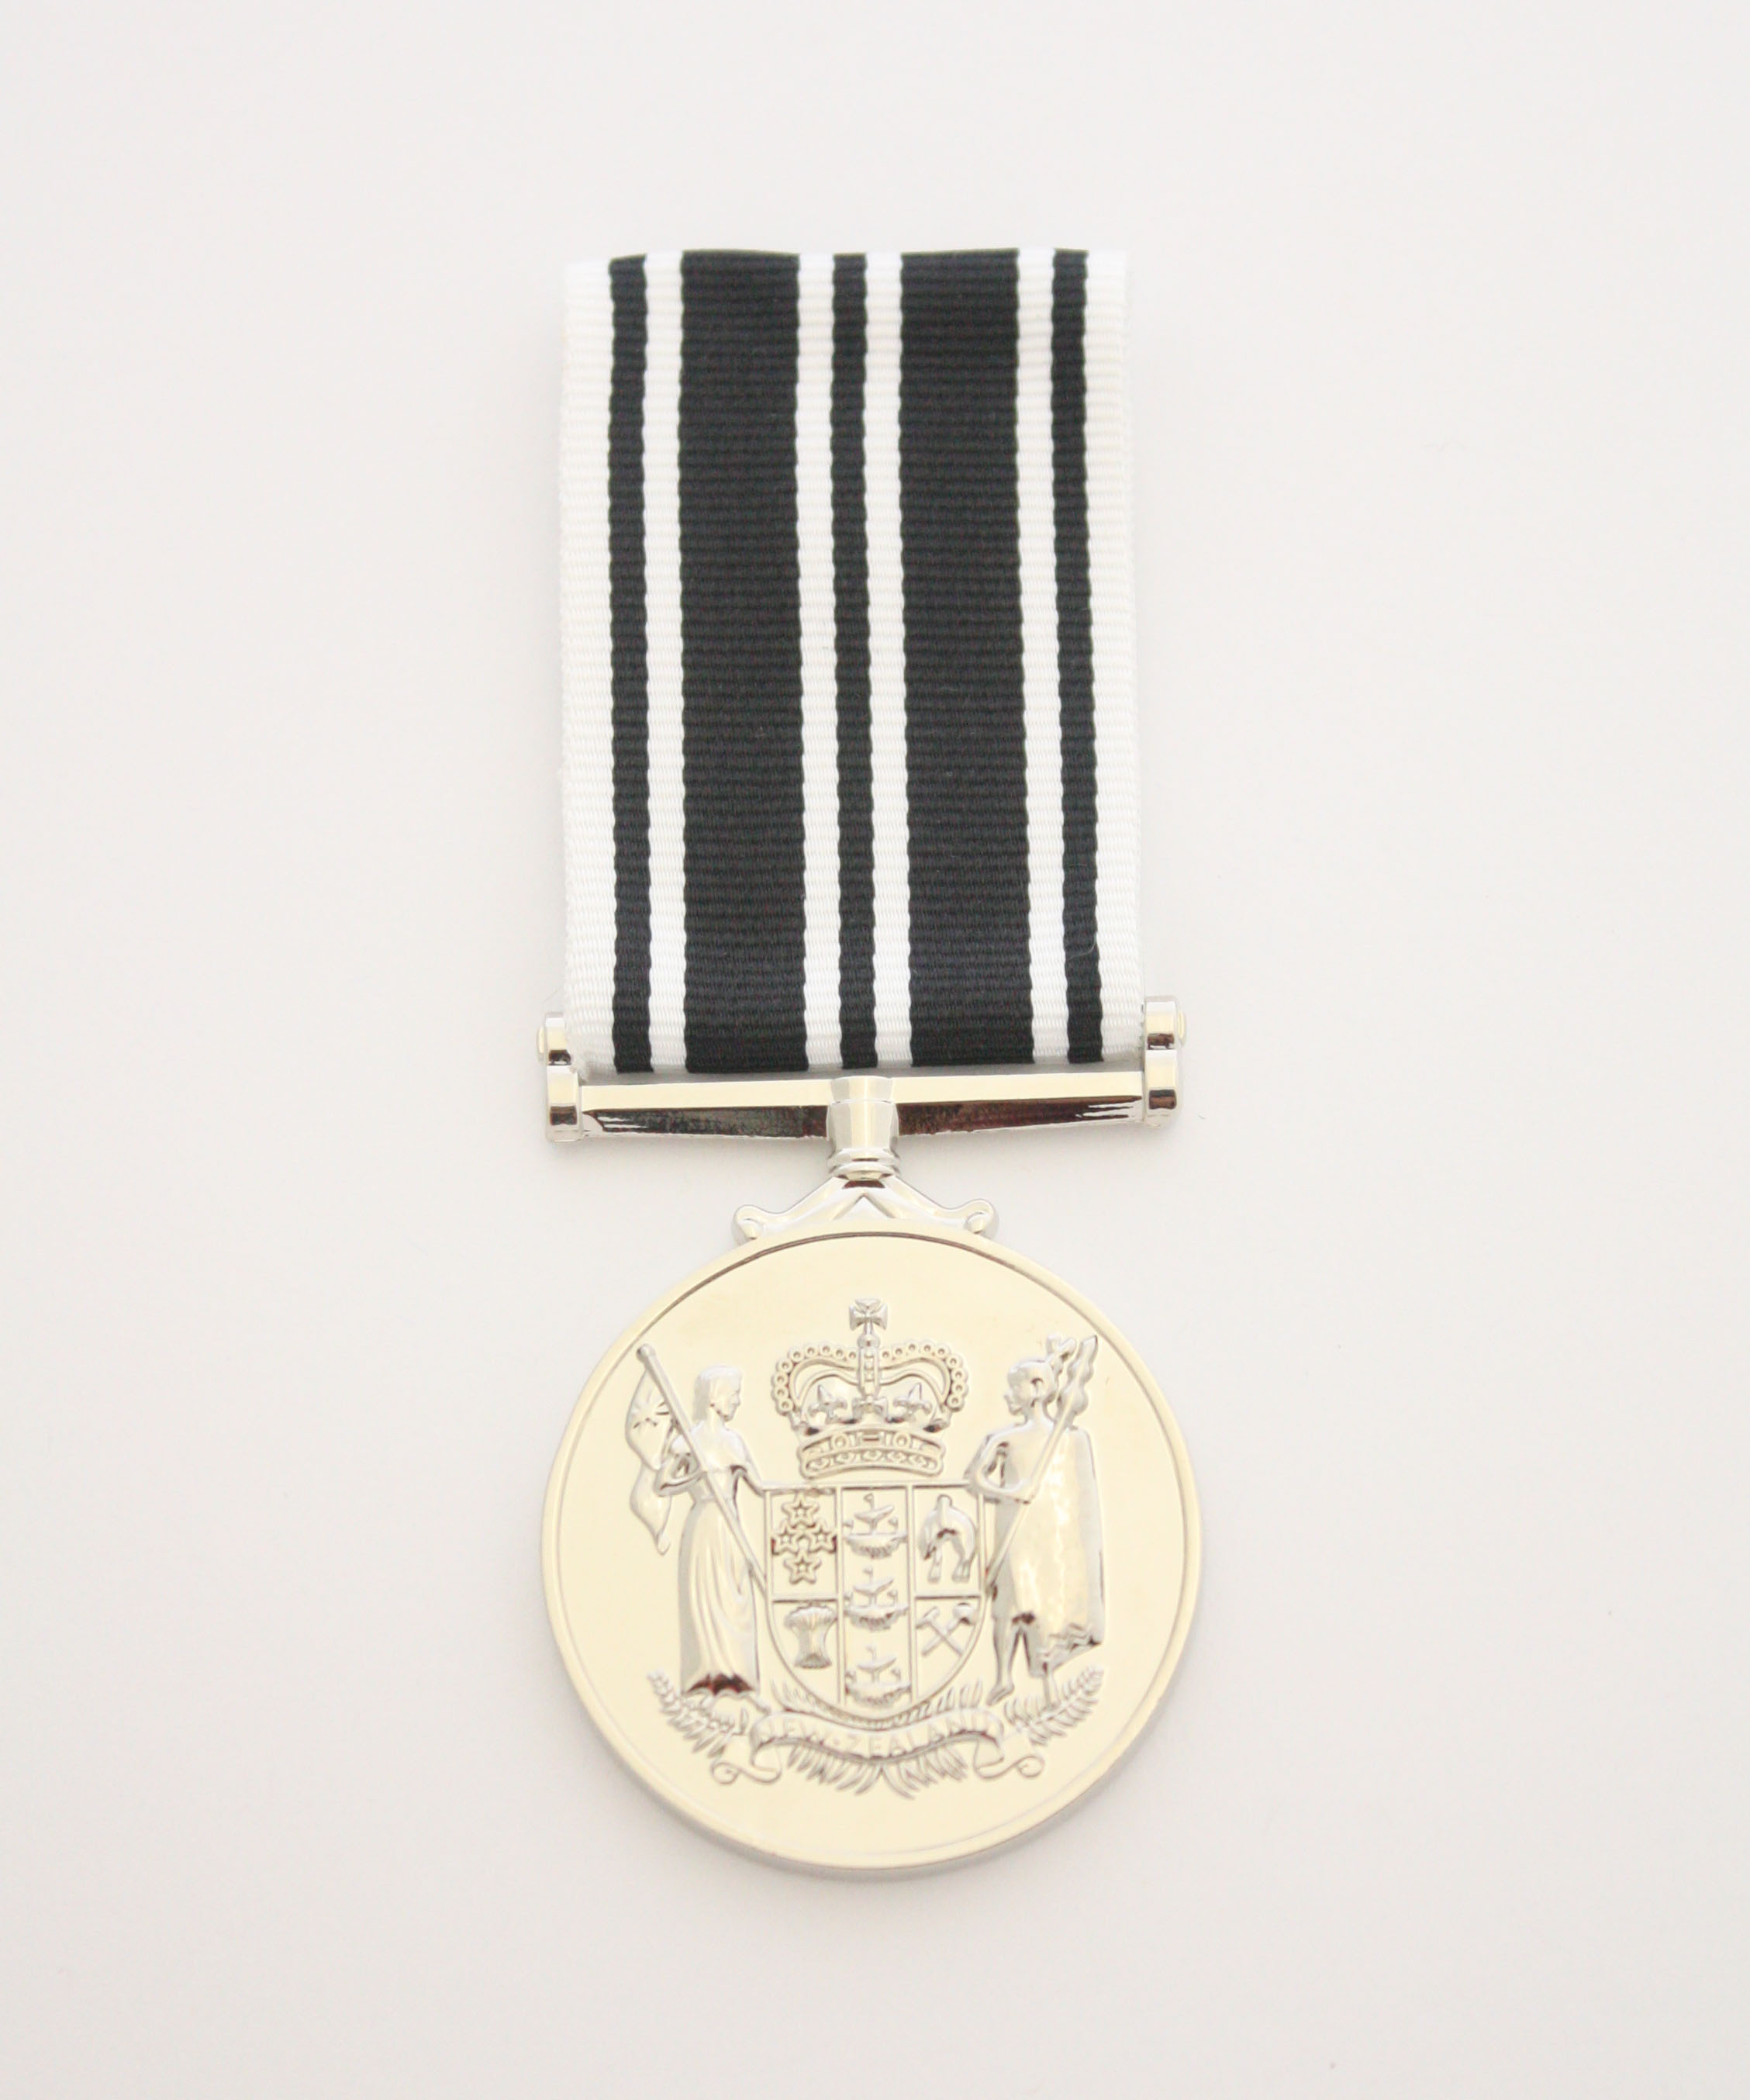 New Zealand Operational Service Medal